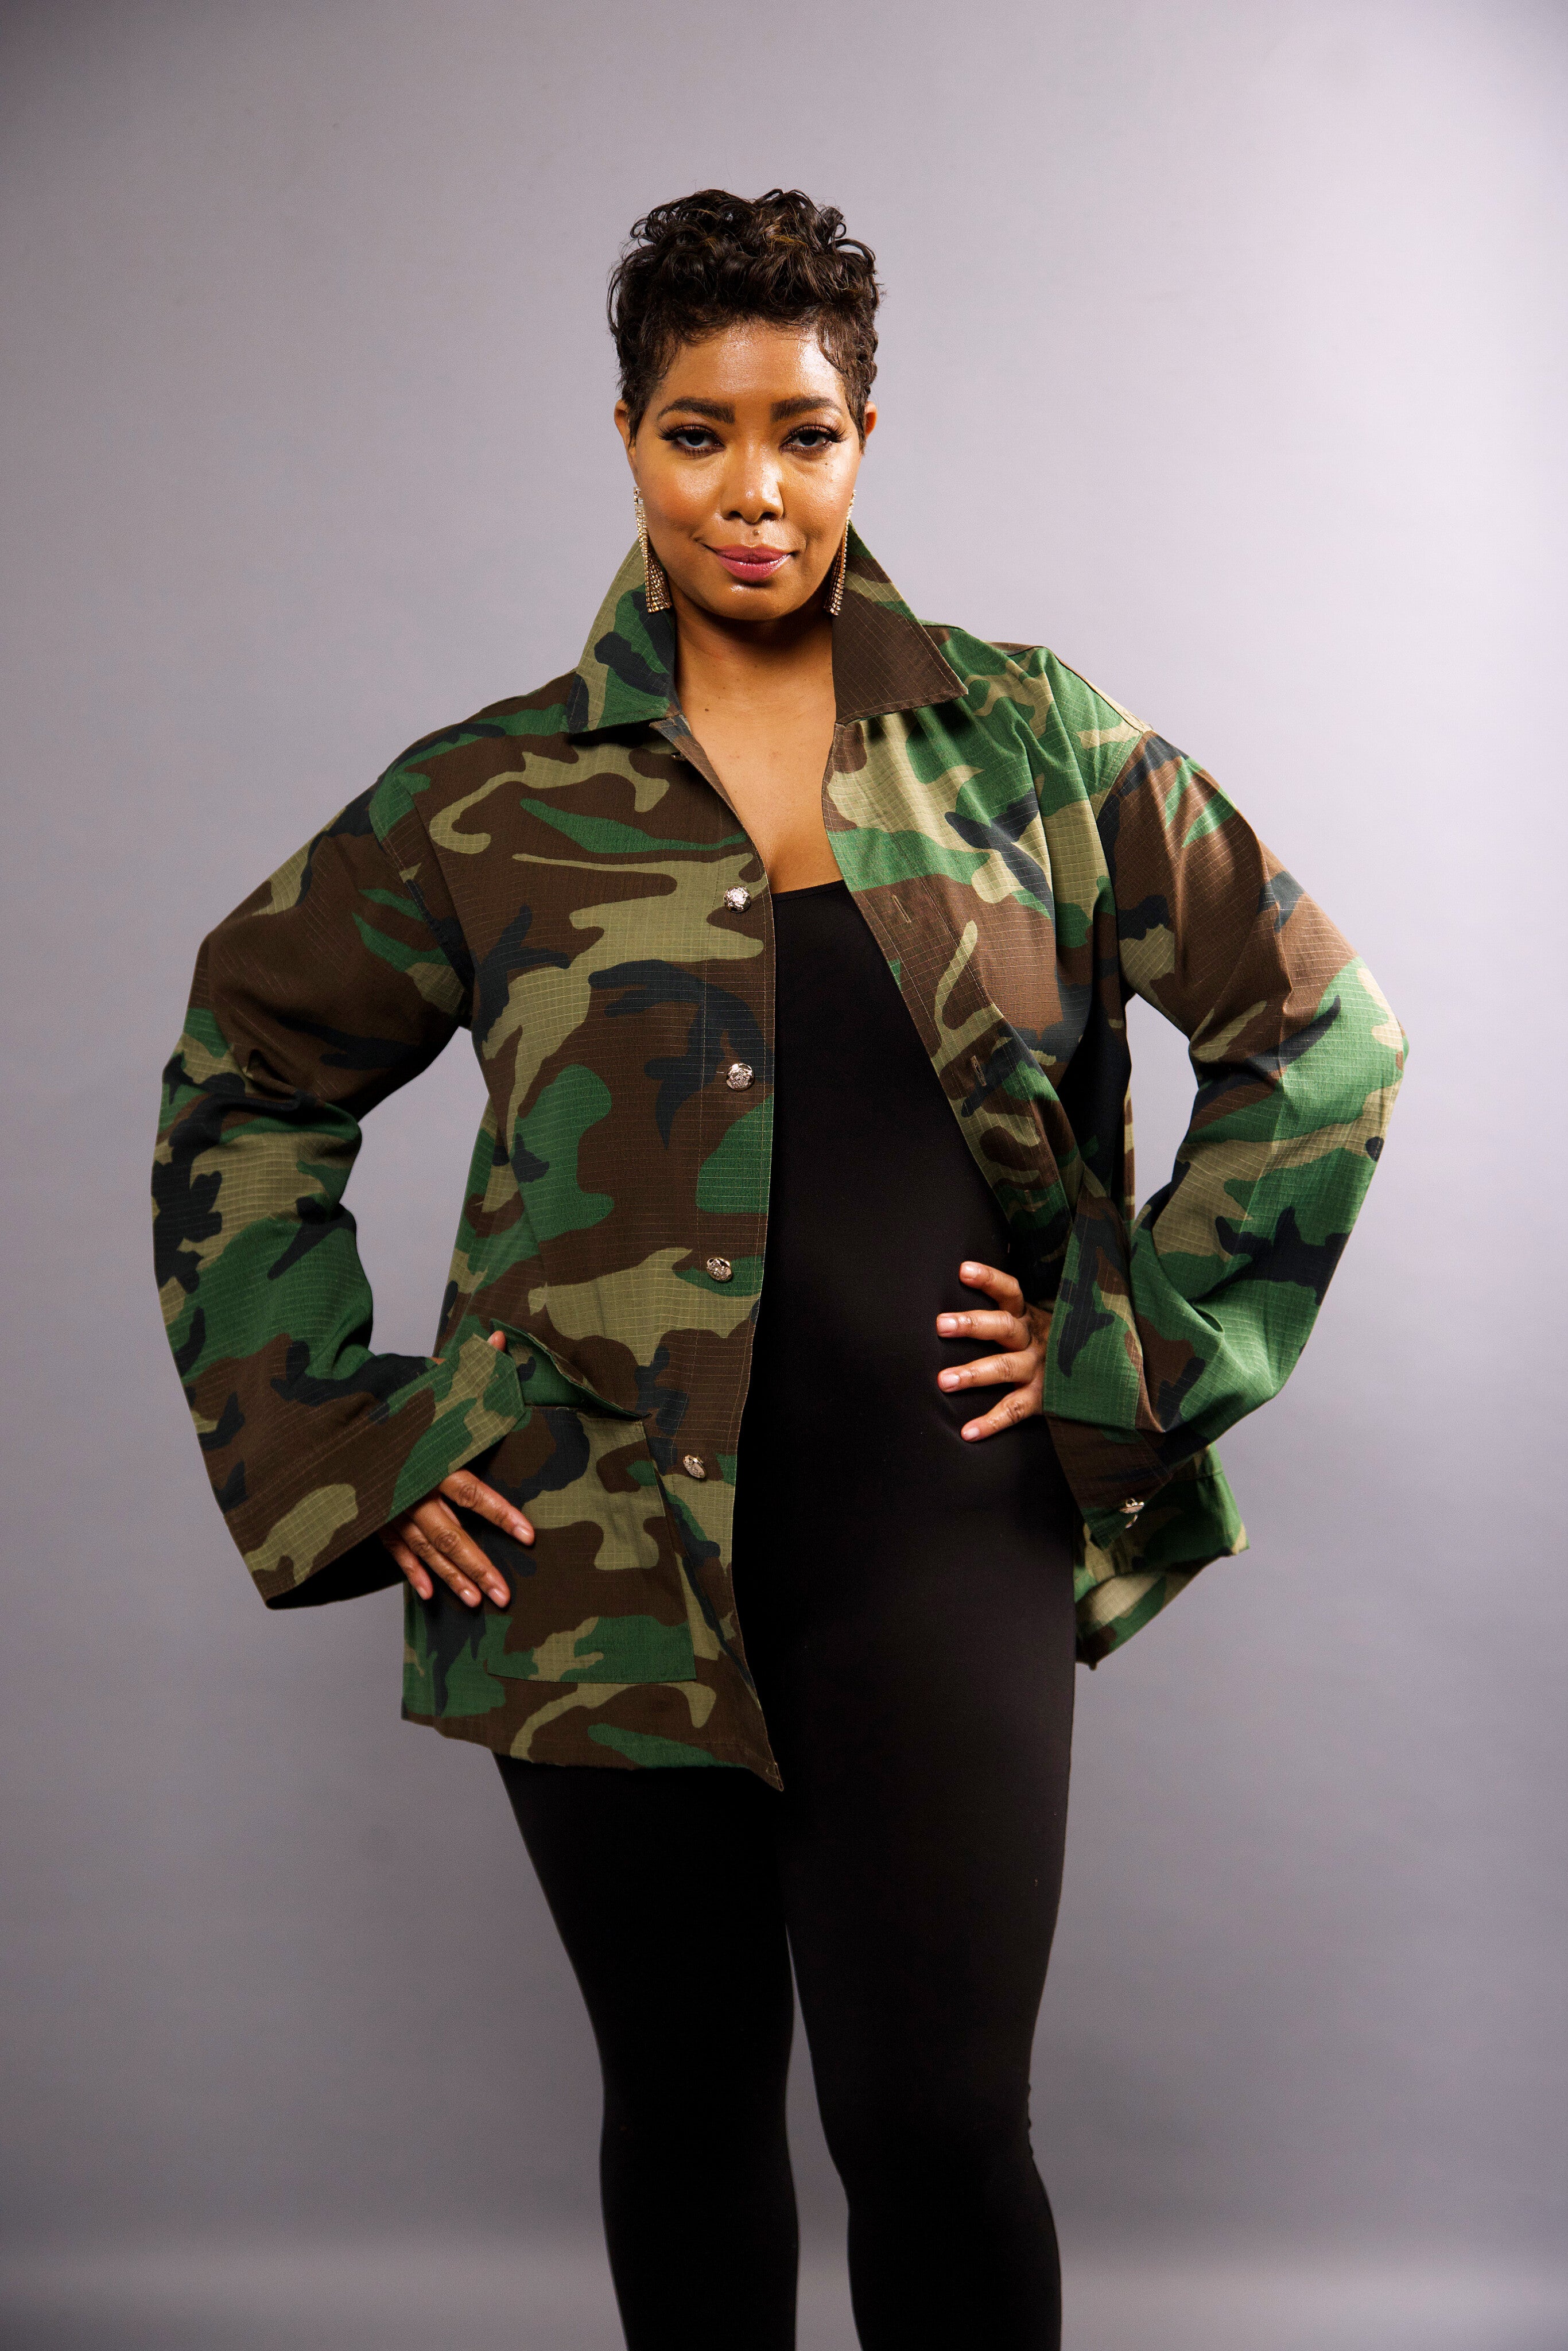 Camo Jacket Refurbished with Teal Sequins – Leopard Grove